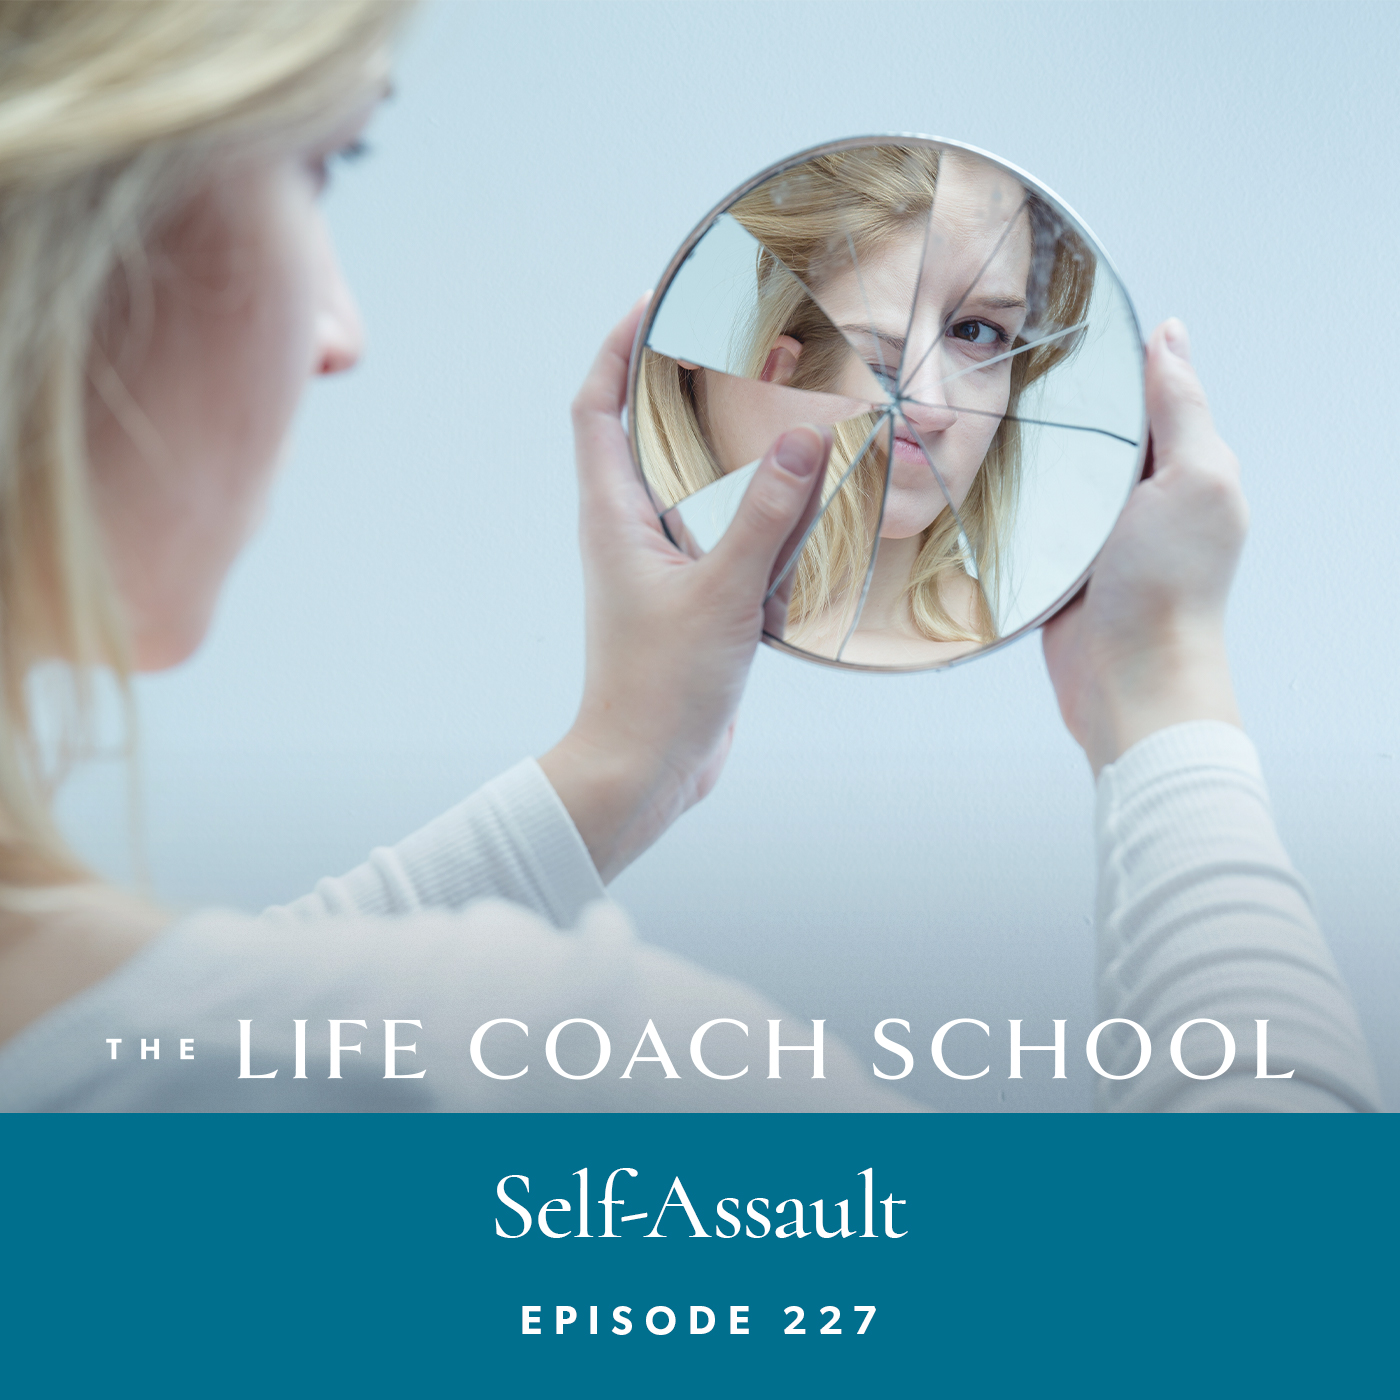 The Life Coach School Podcast with Brooke Castillo | Episode 227 | Self-Assault